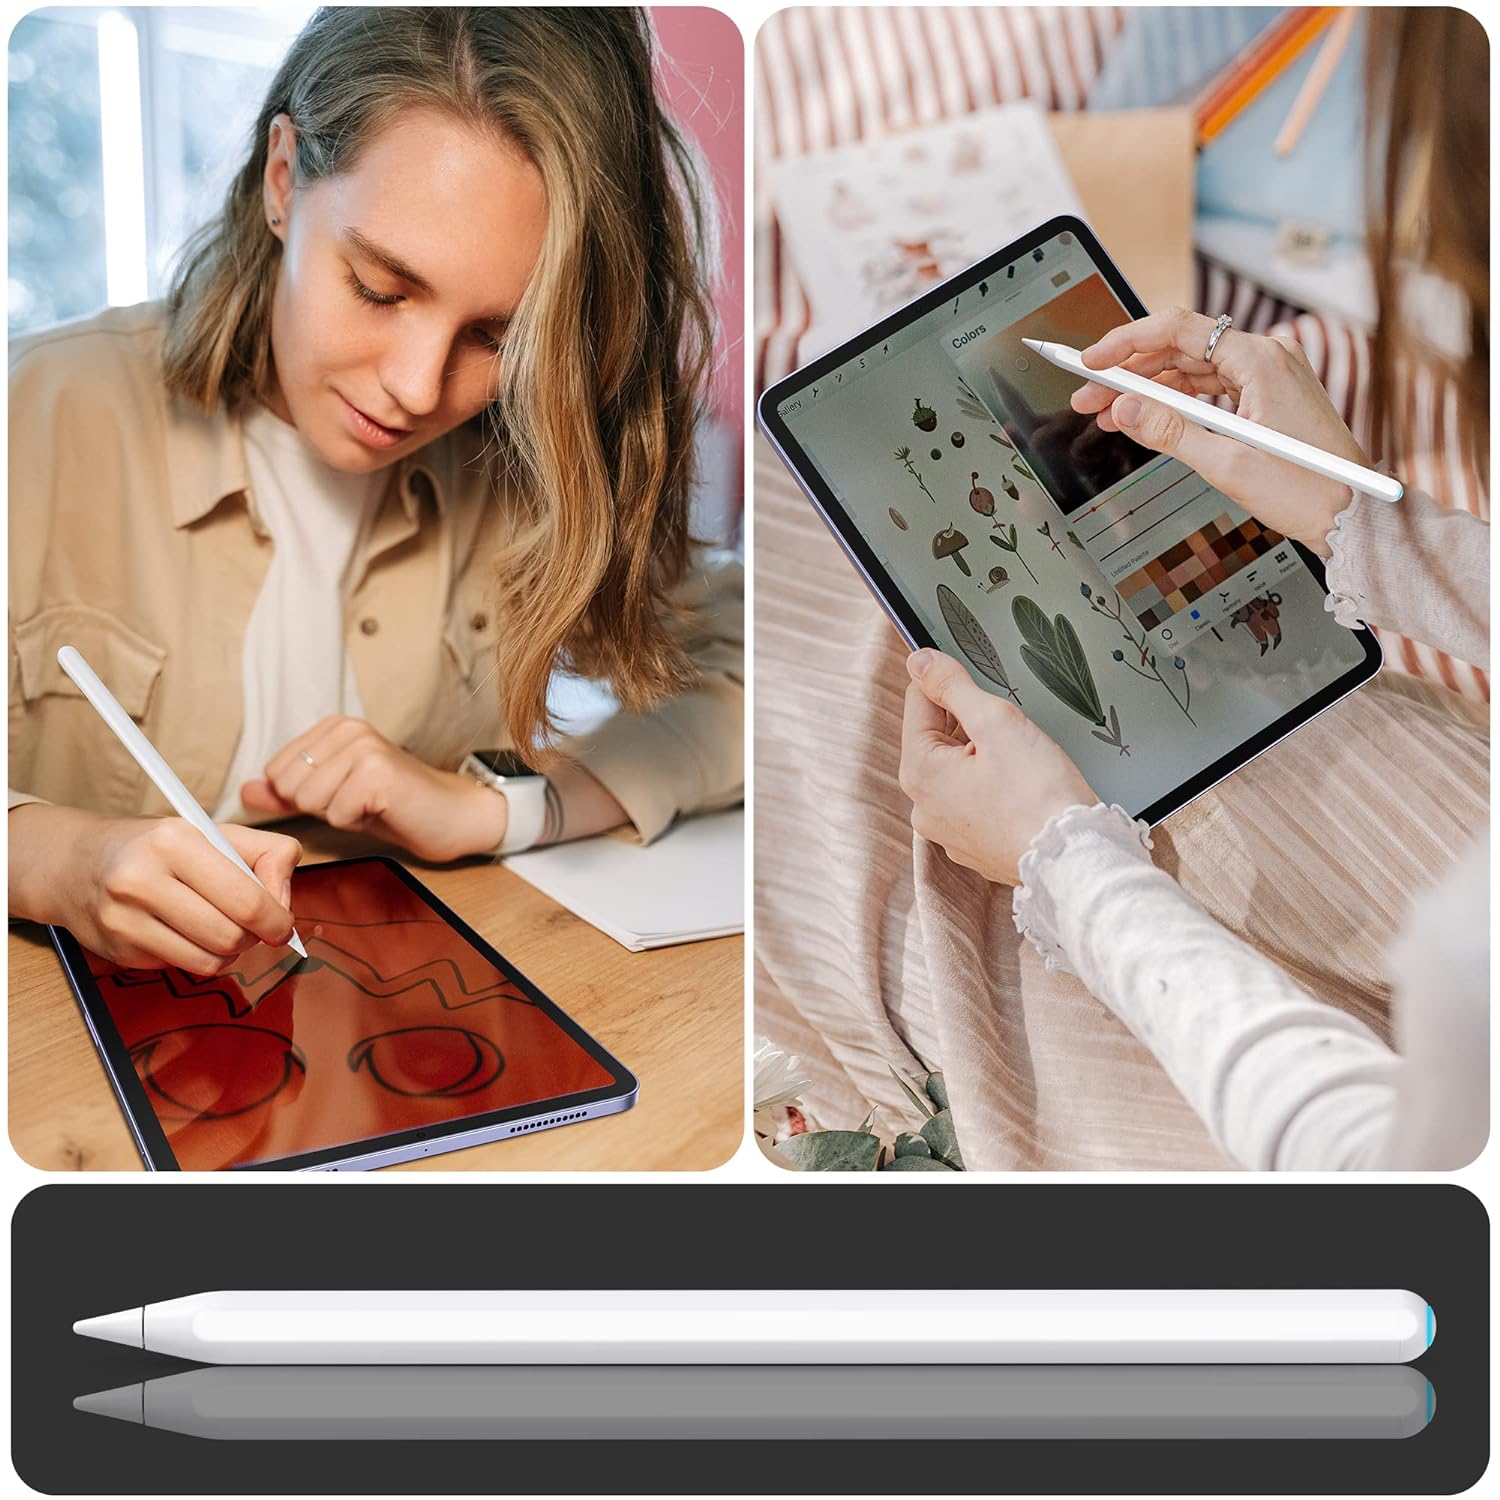 INFILAND iPad Pencil 2nd Generation with Palm Rejection,[Magnetic Wireless Charging] iPad Stylus Pen for Apple iPad Pro (11/12.9 Inch),iPad Air 4th/5th Gen,iPad Mini 6th Gen,White